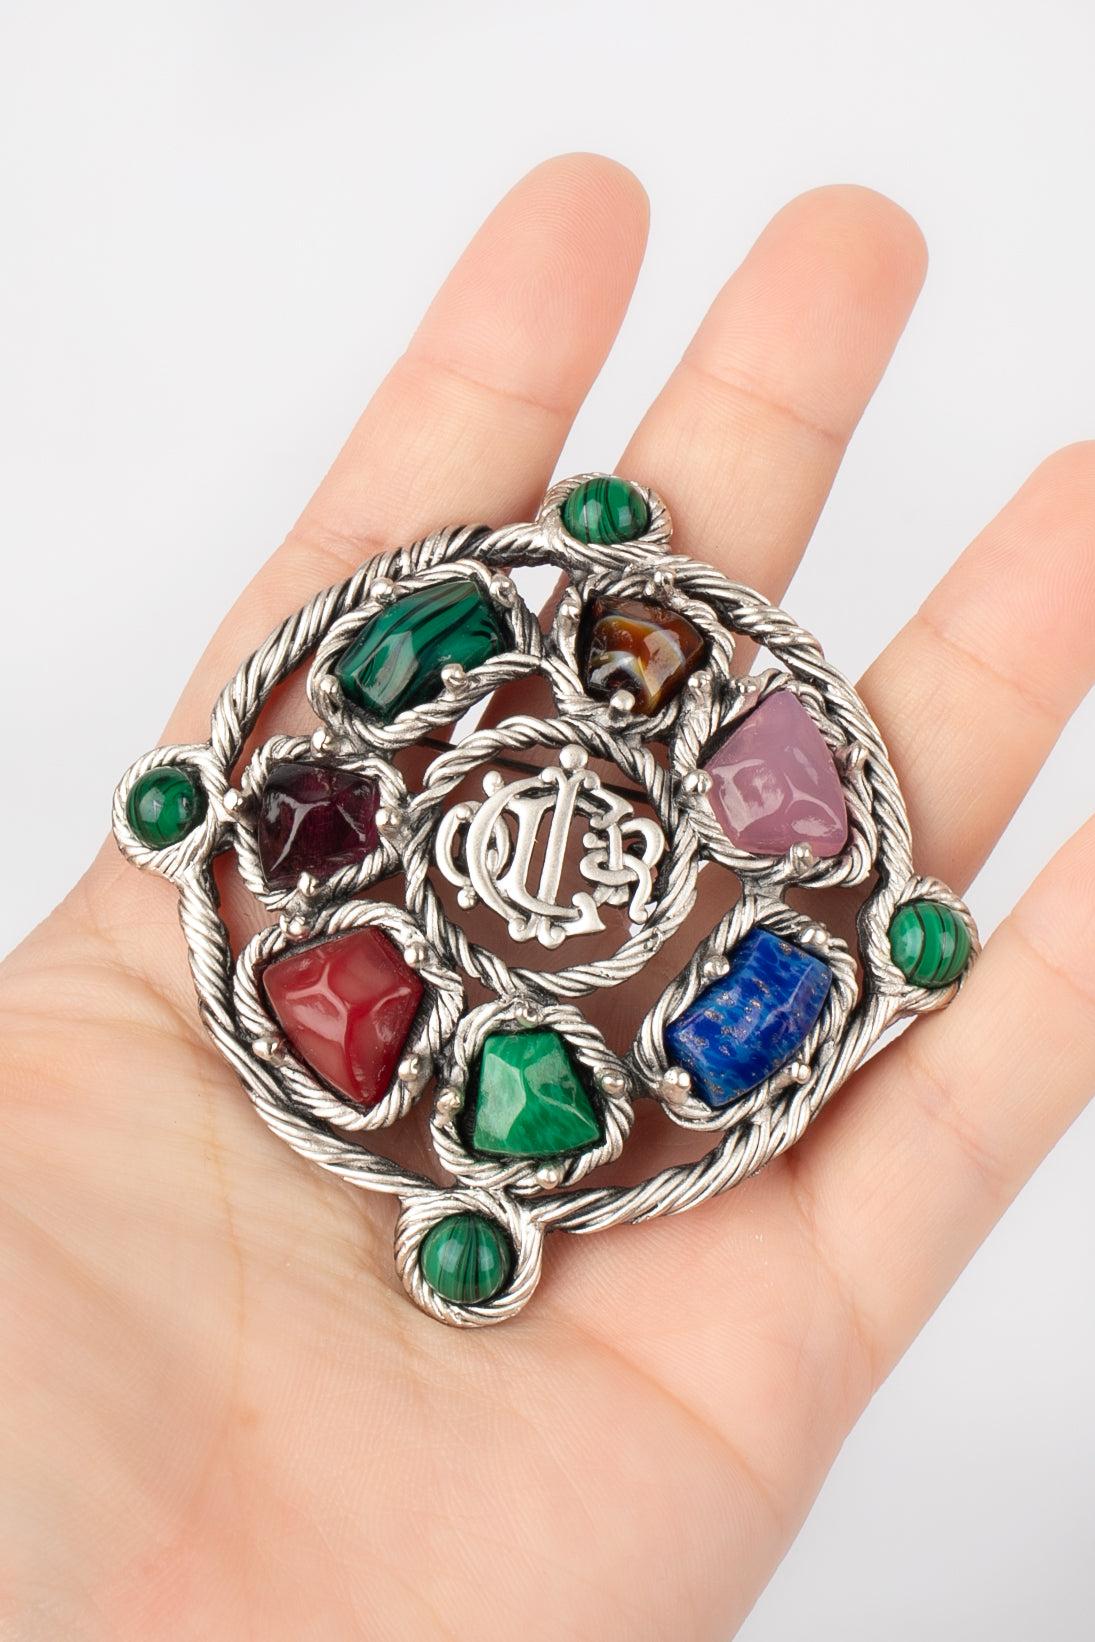 Dior - Silvery metal brooch ornamented with hardstones.
 
 Additional information: 
 Condition: Very good condition
 Dimensions: 7 cm x 7 cm
 
 Seller Reference: BR149